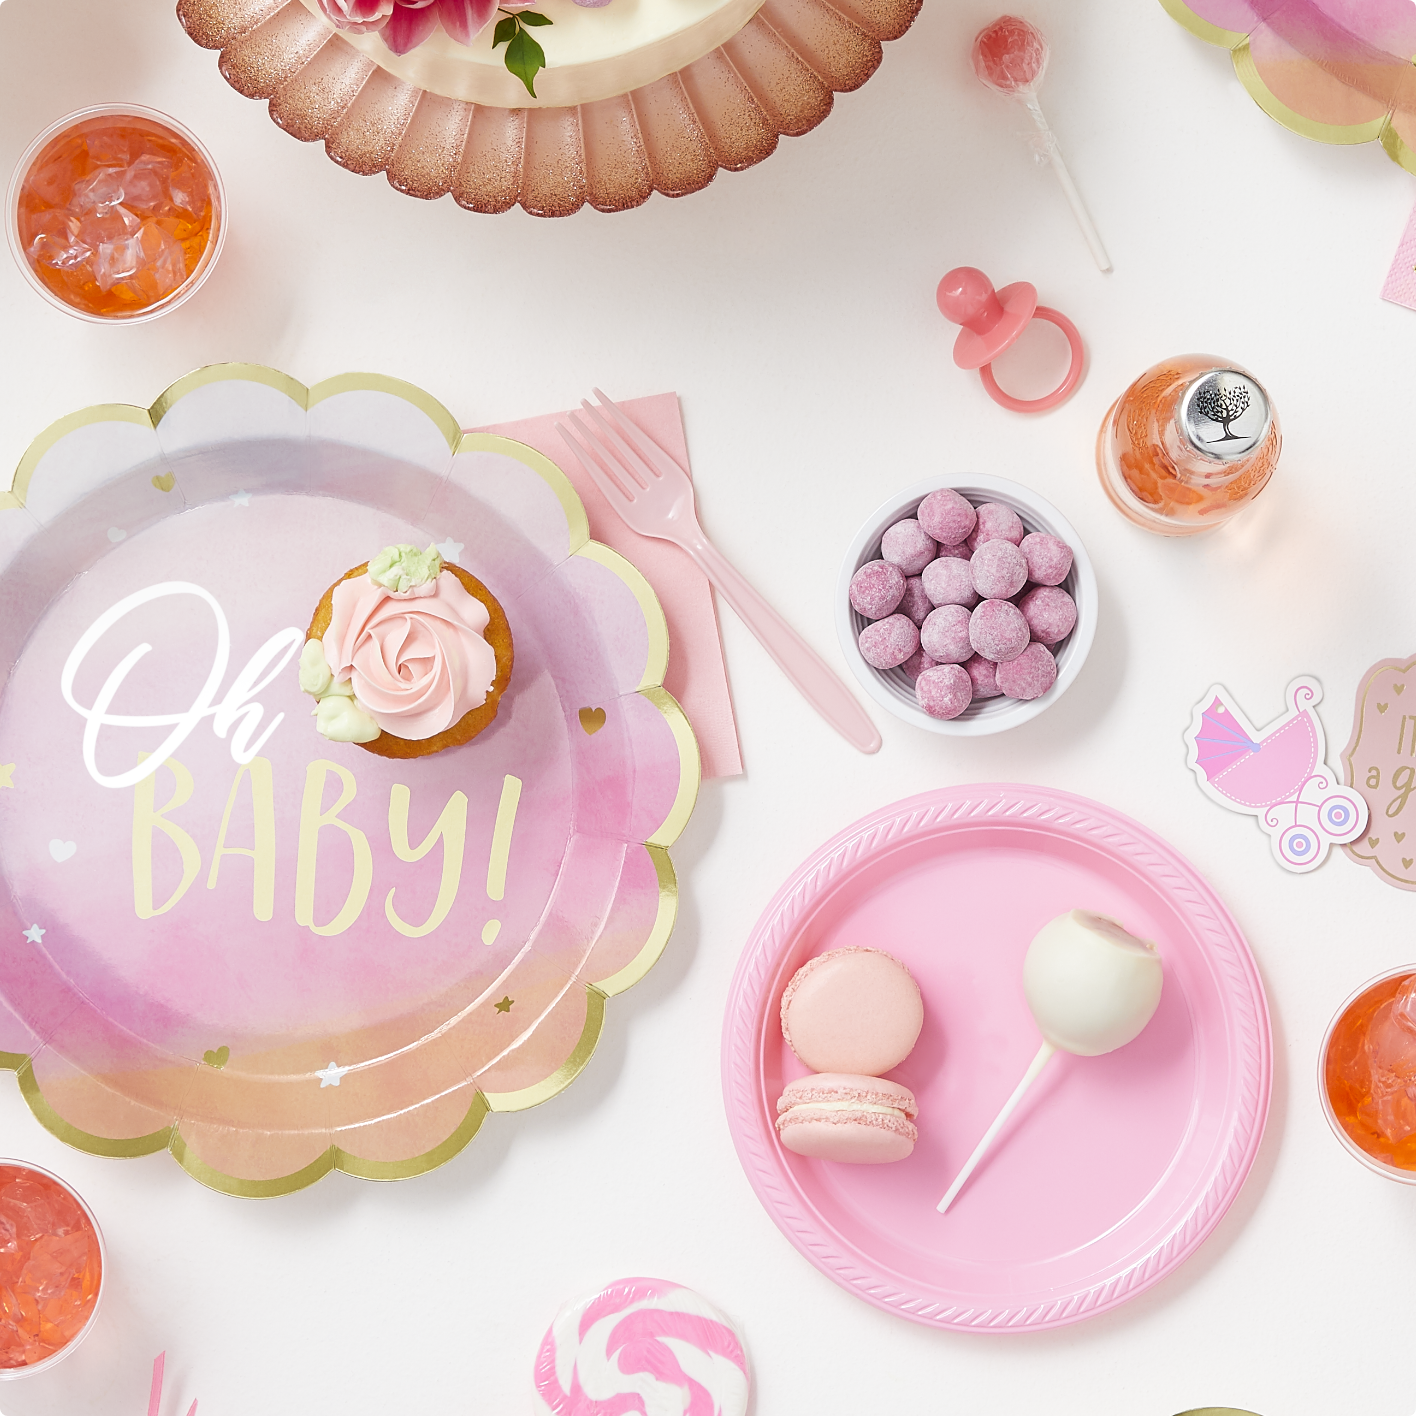 An "Oh Baby" metallic gold and pink plate, a pink round paper plate, pink cutlery, and an assortment of pink dessert on a white backdrop.